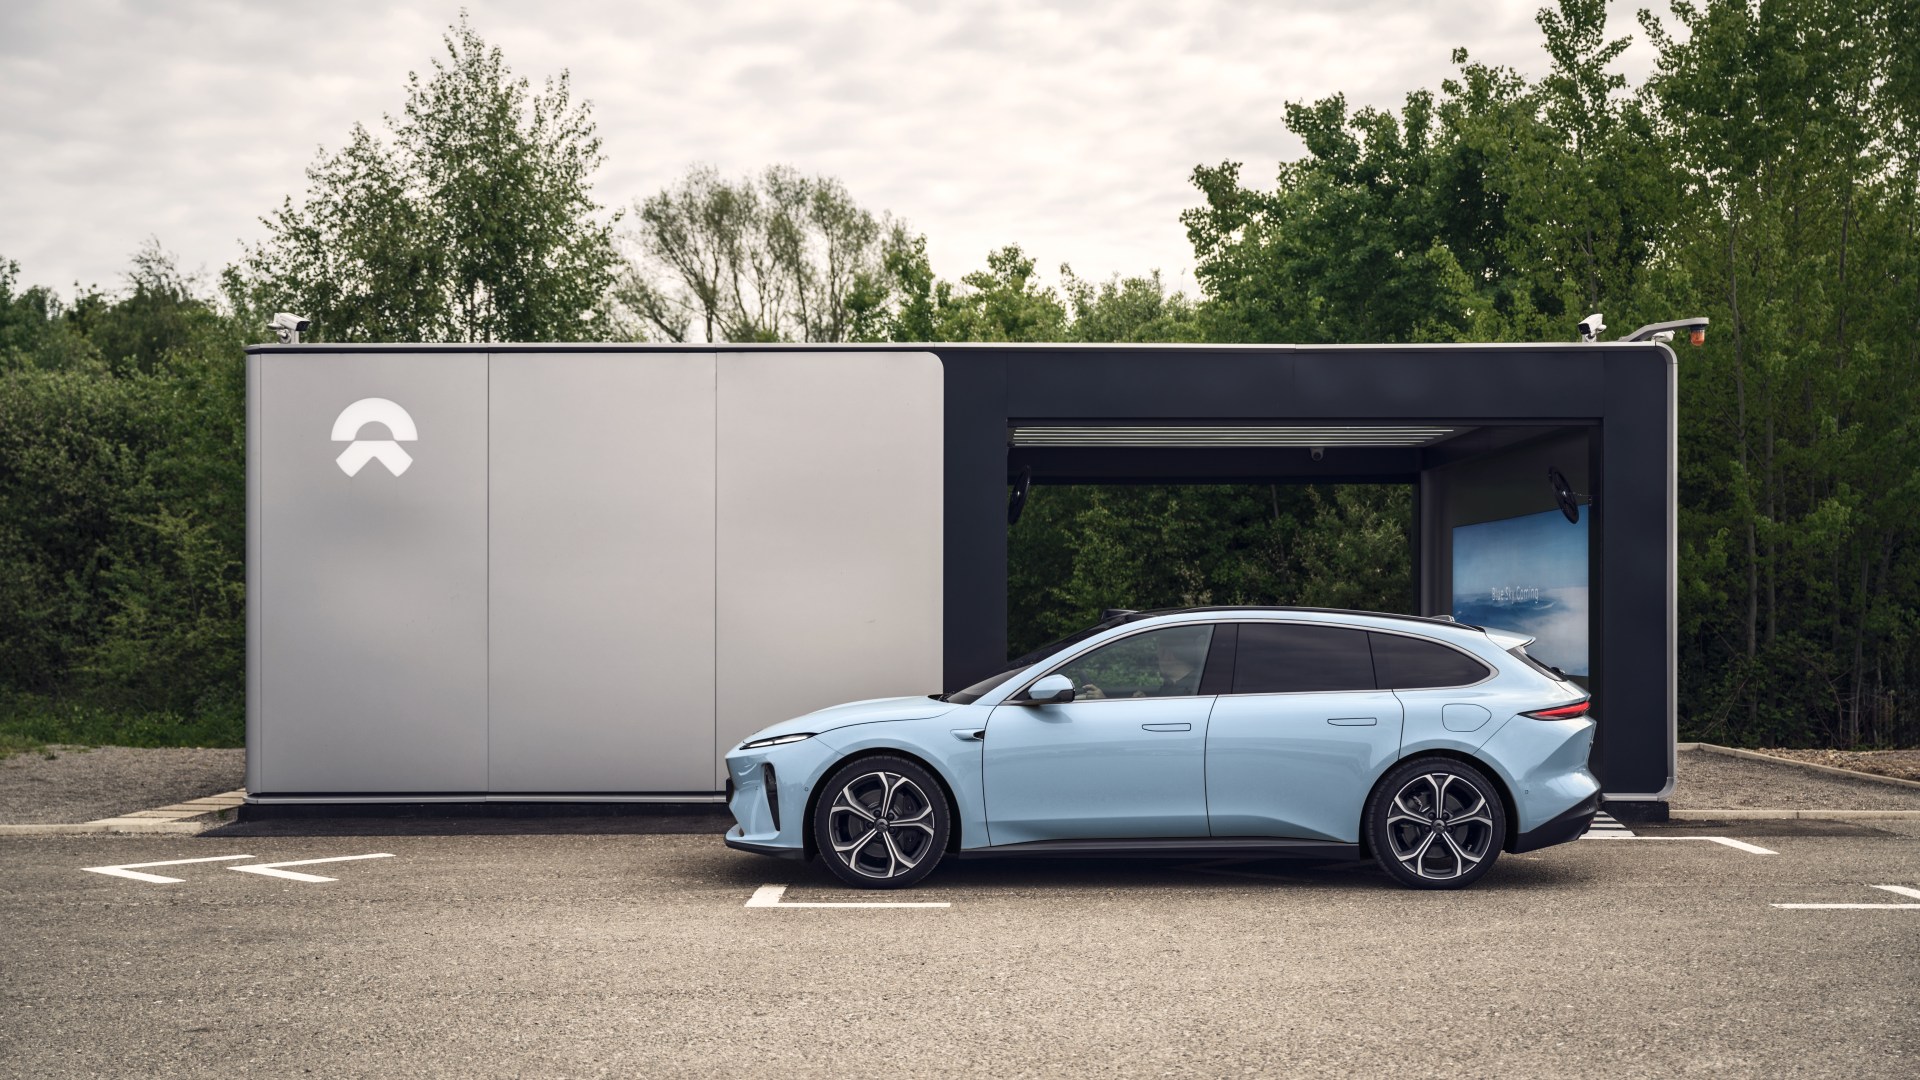 High-tech Nio ET5 is a quick, quiet EV with batteries that can be swapped in just FOUR minutes – is this the future? [Video]